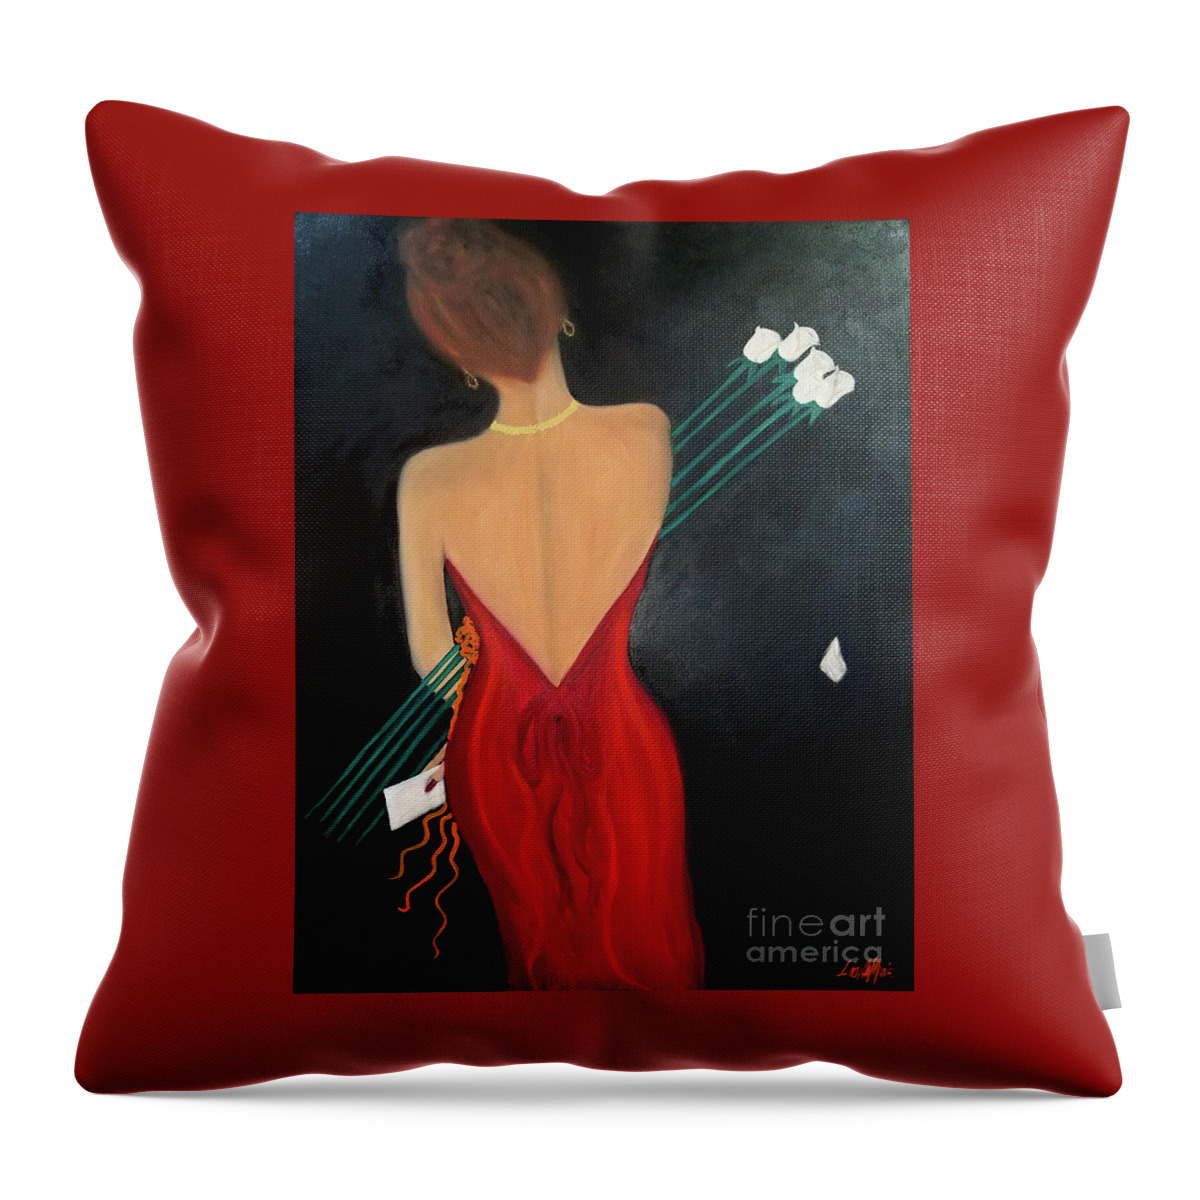 Lady In Red Throw Pillow featuring the painting Flowers From A Friend by Artist Linda Marie